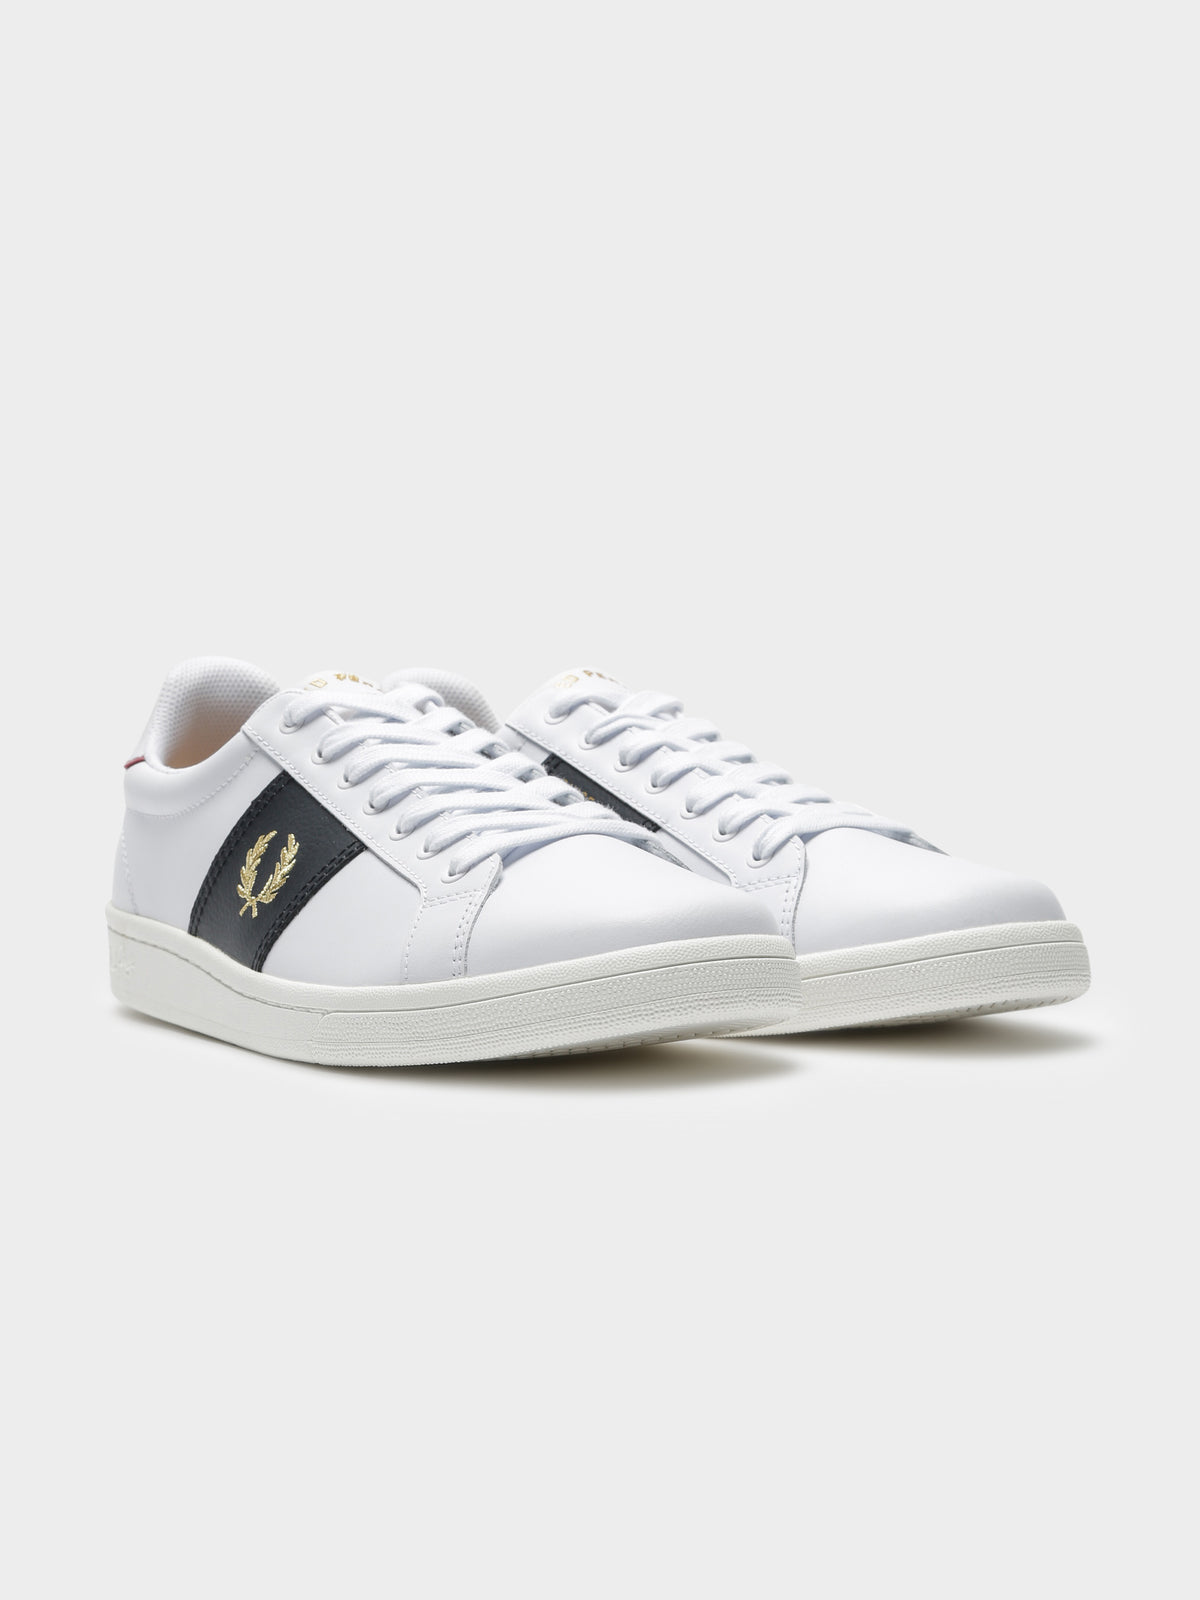 Mens B721 Leather Sneaker in White and Black